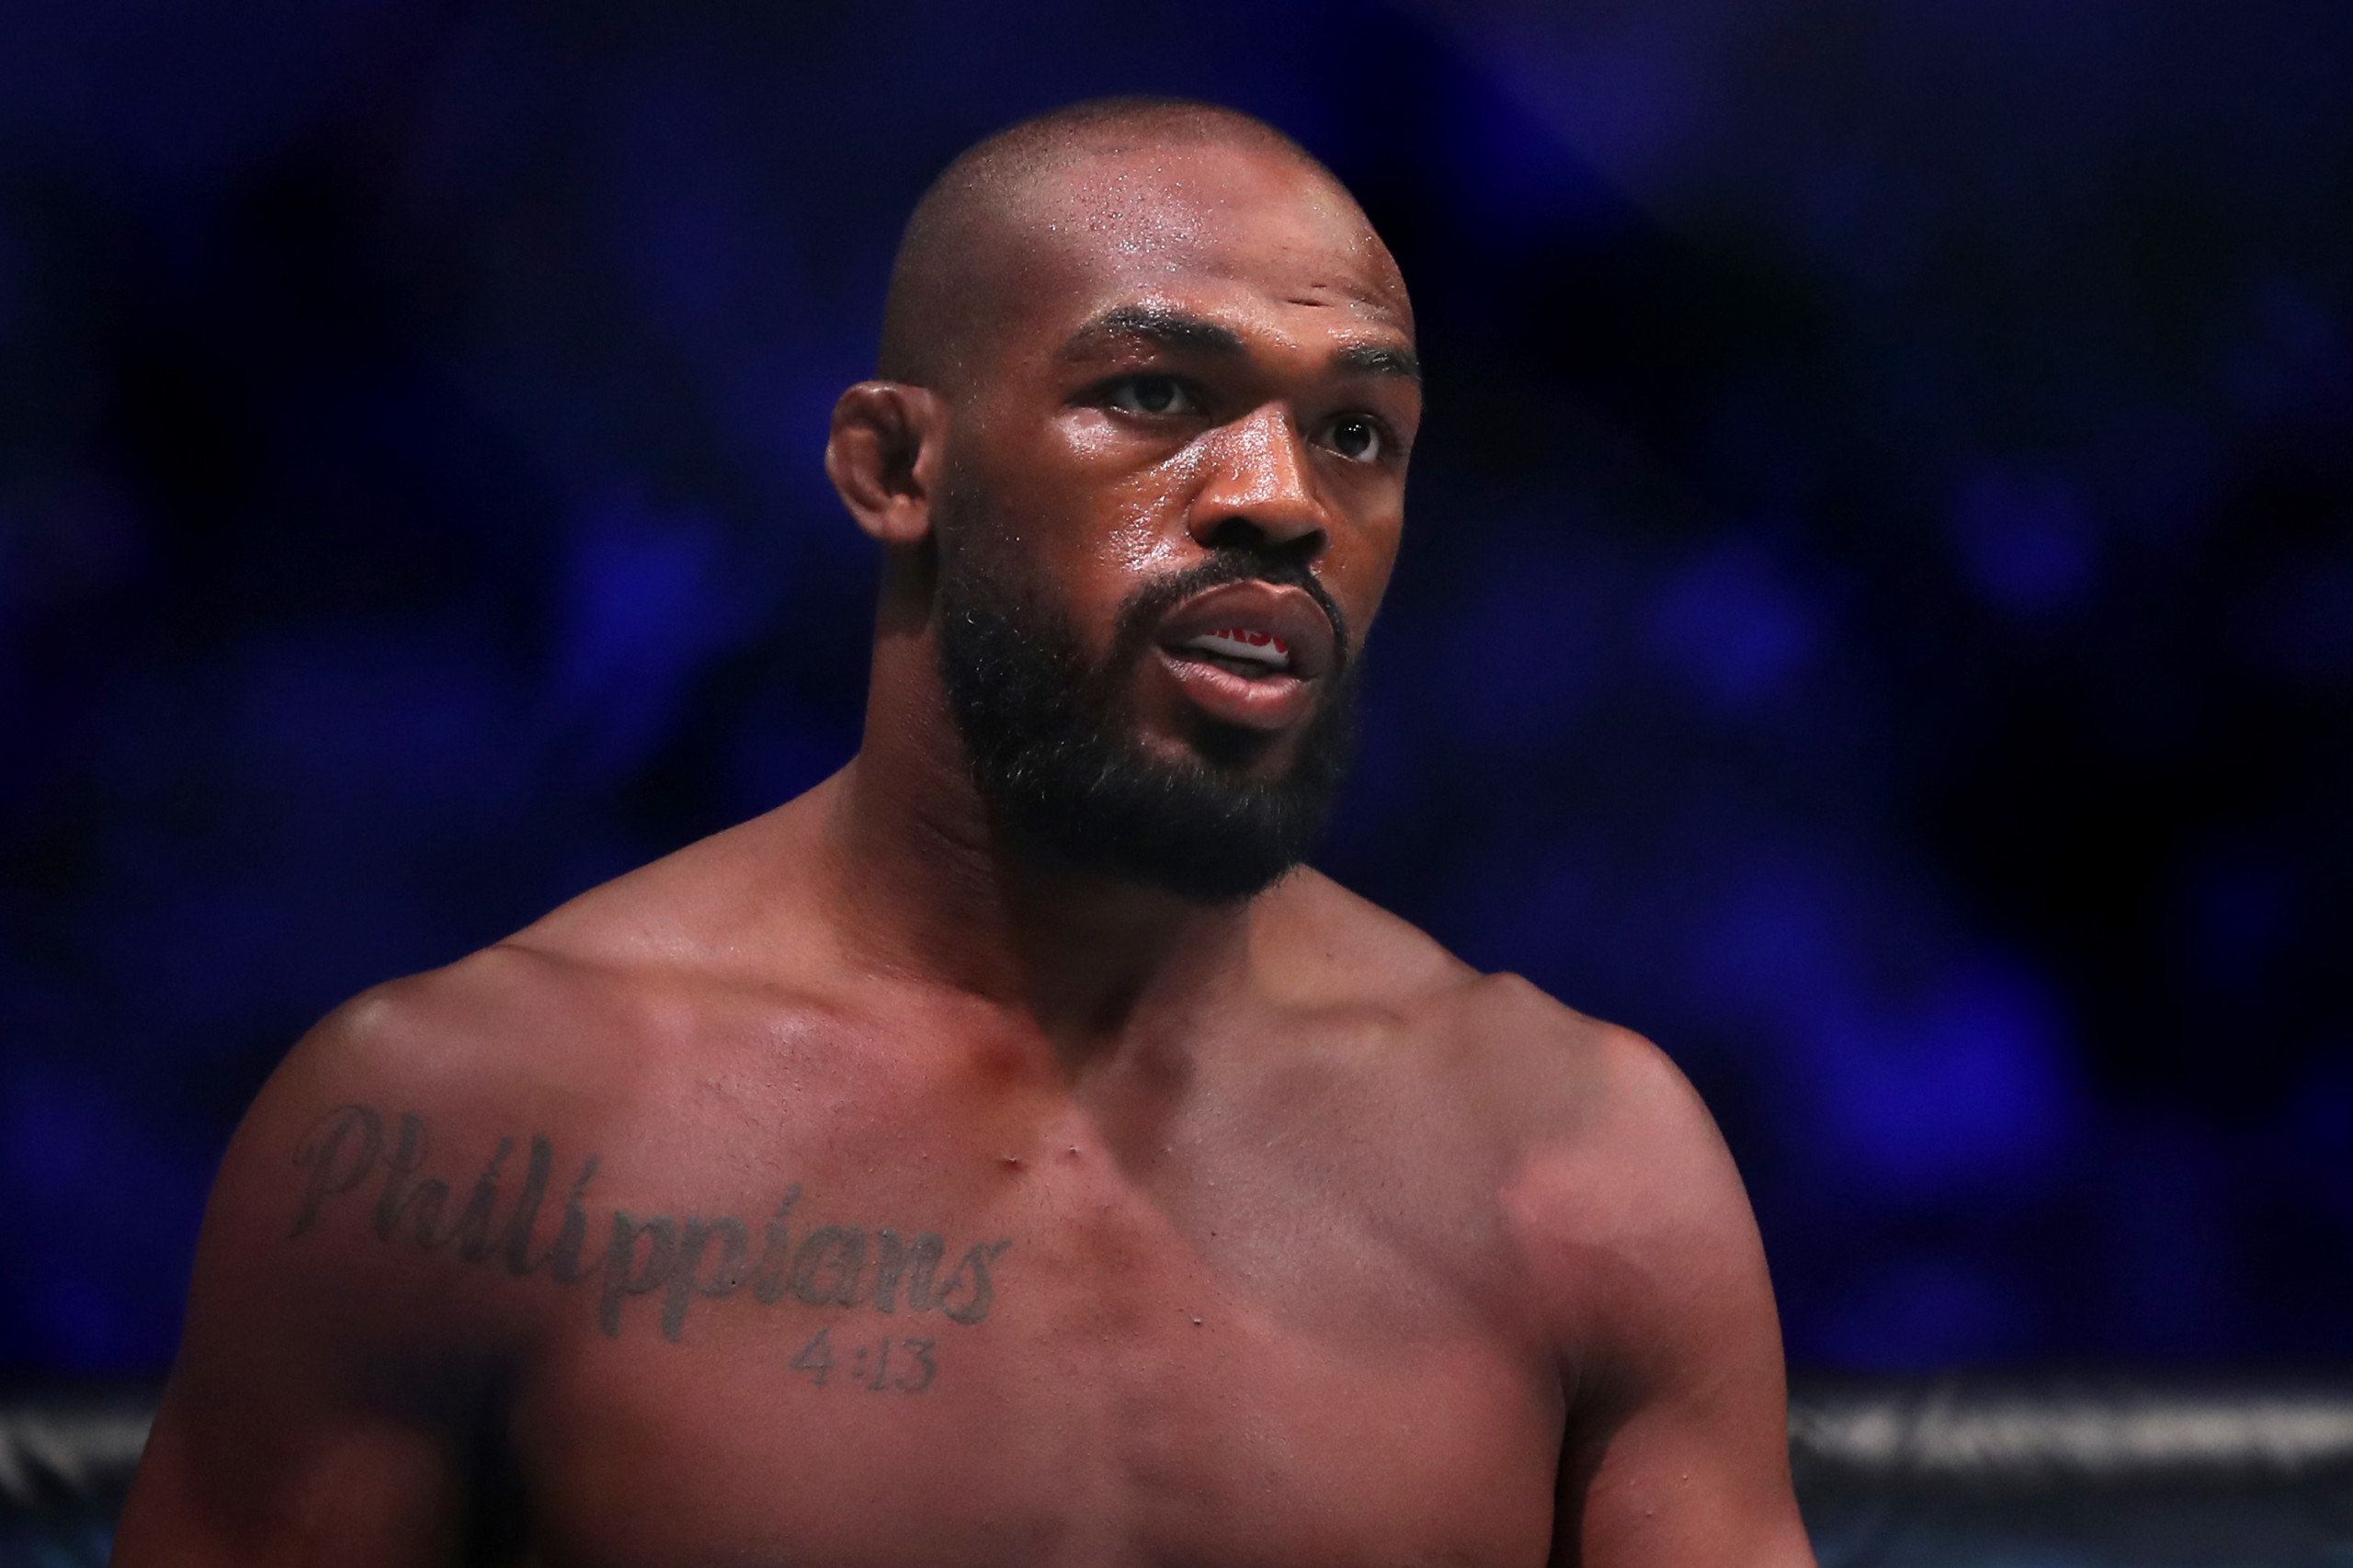 UFC fighter Jon Jones takes spray cans from demonstrators as protests